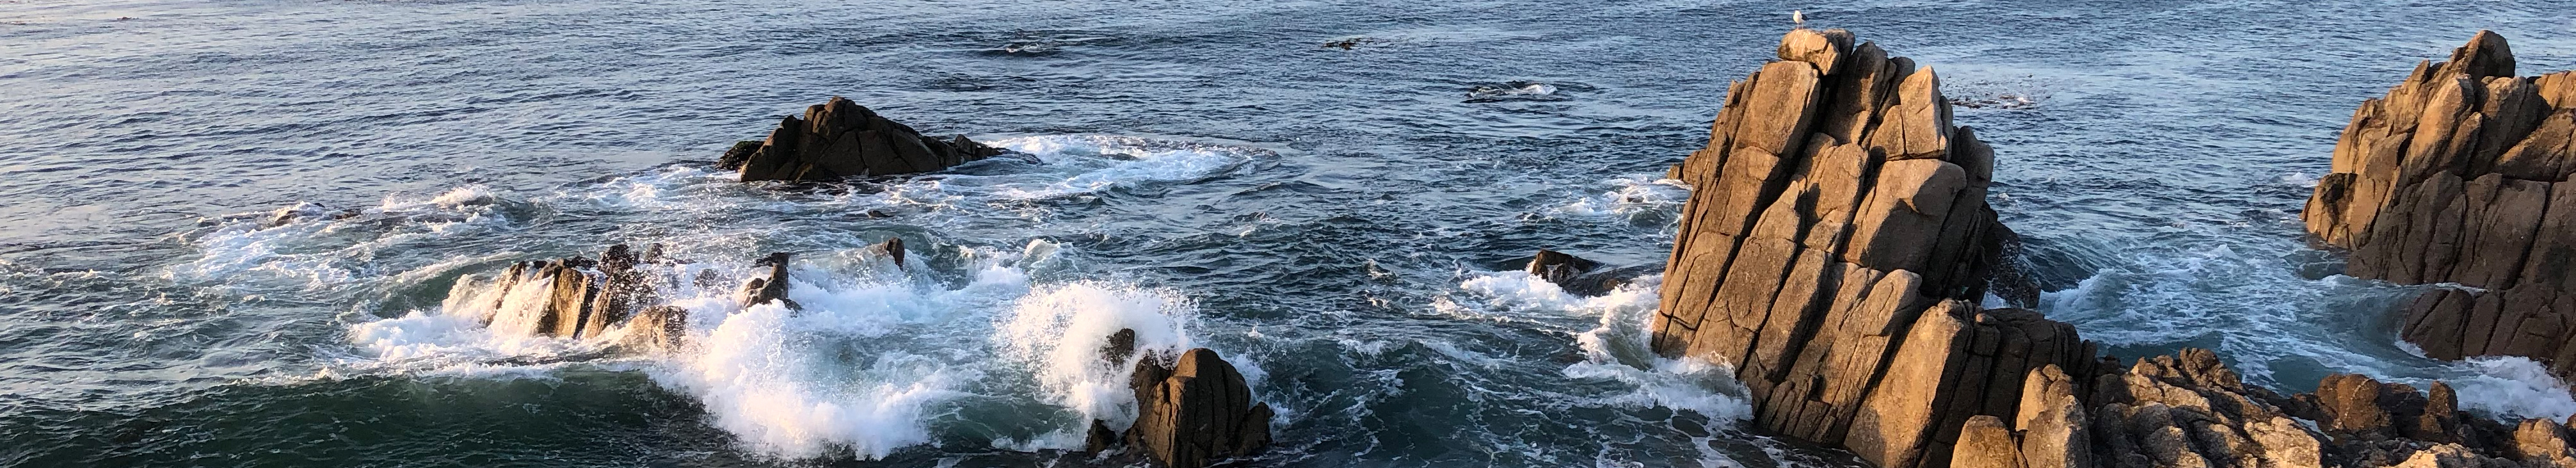 Waves on rocks at sunset, Lovers Point, Pacific Grove, CA